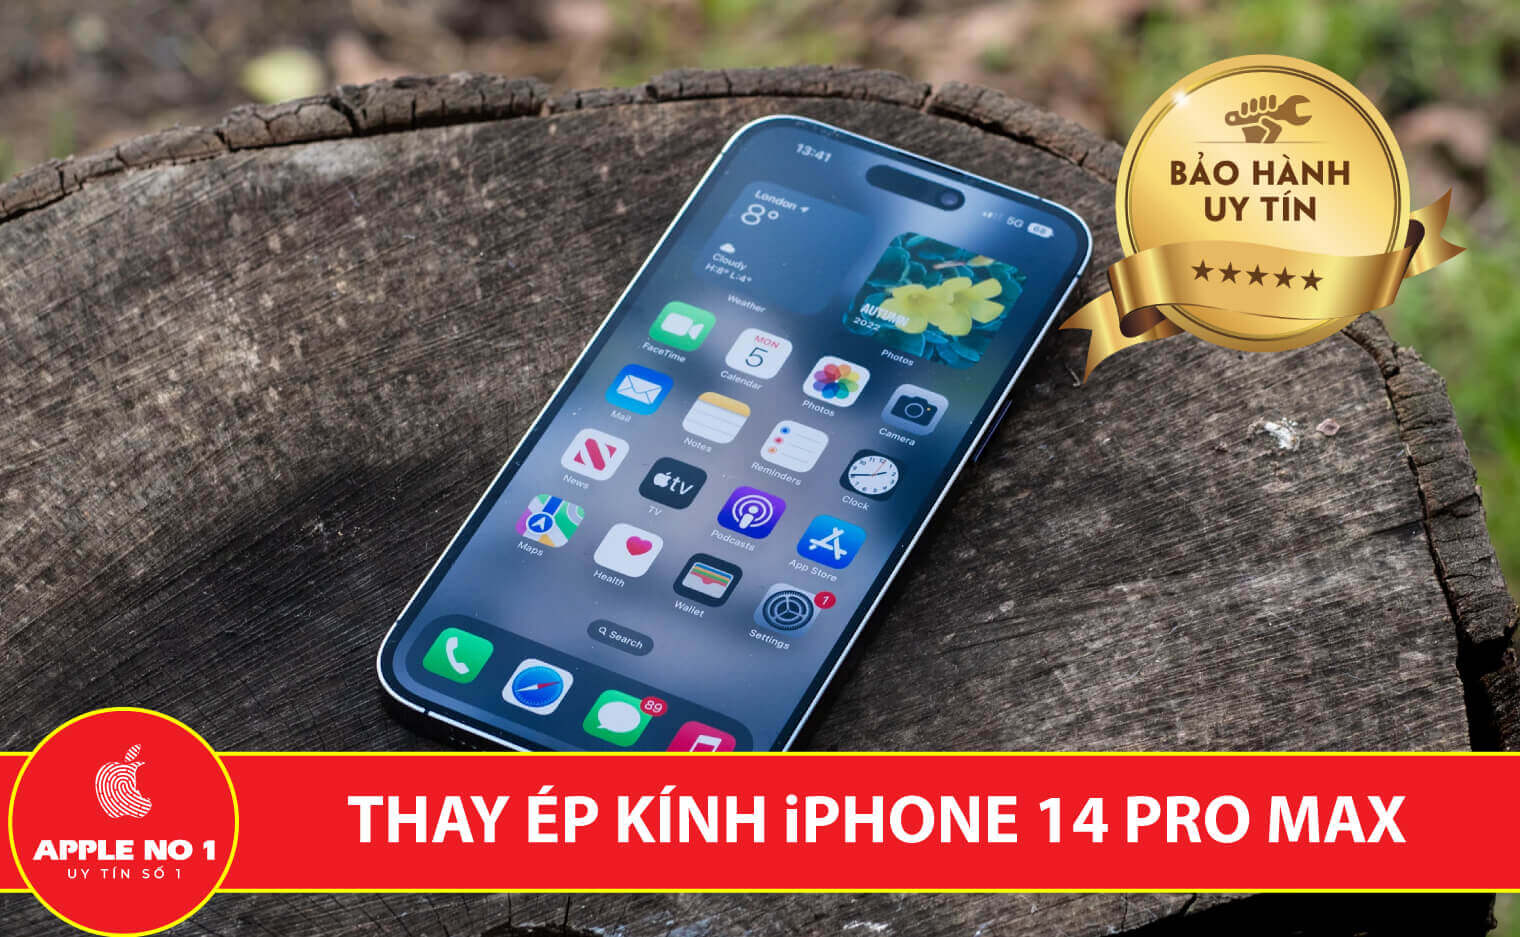 thay ep kinh iphone 14 pro max